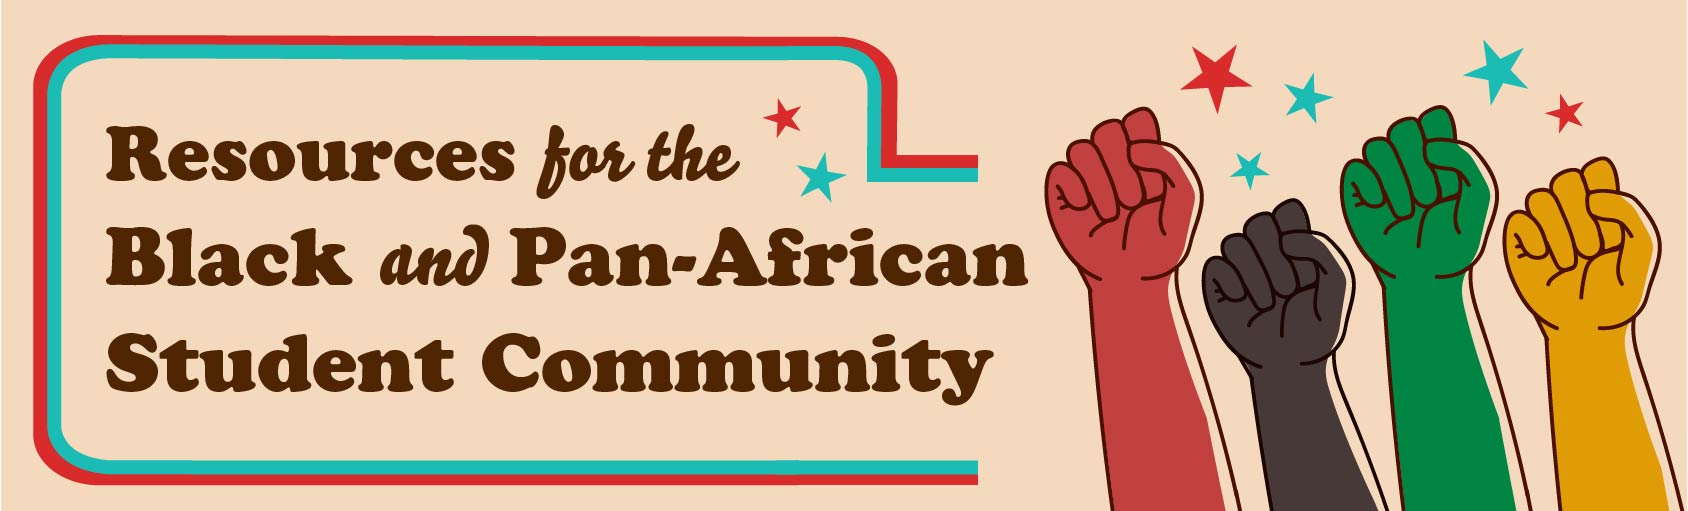 Resources for the Black and Pan-African Student Community